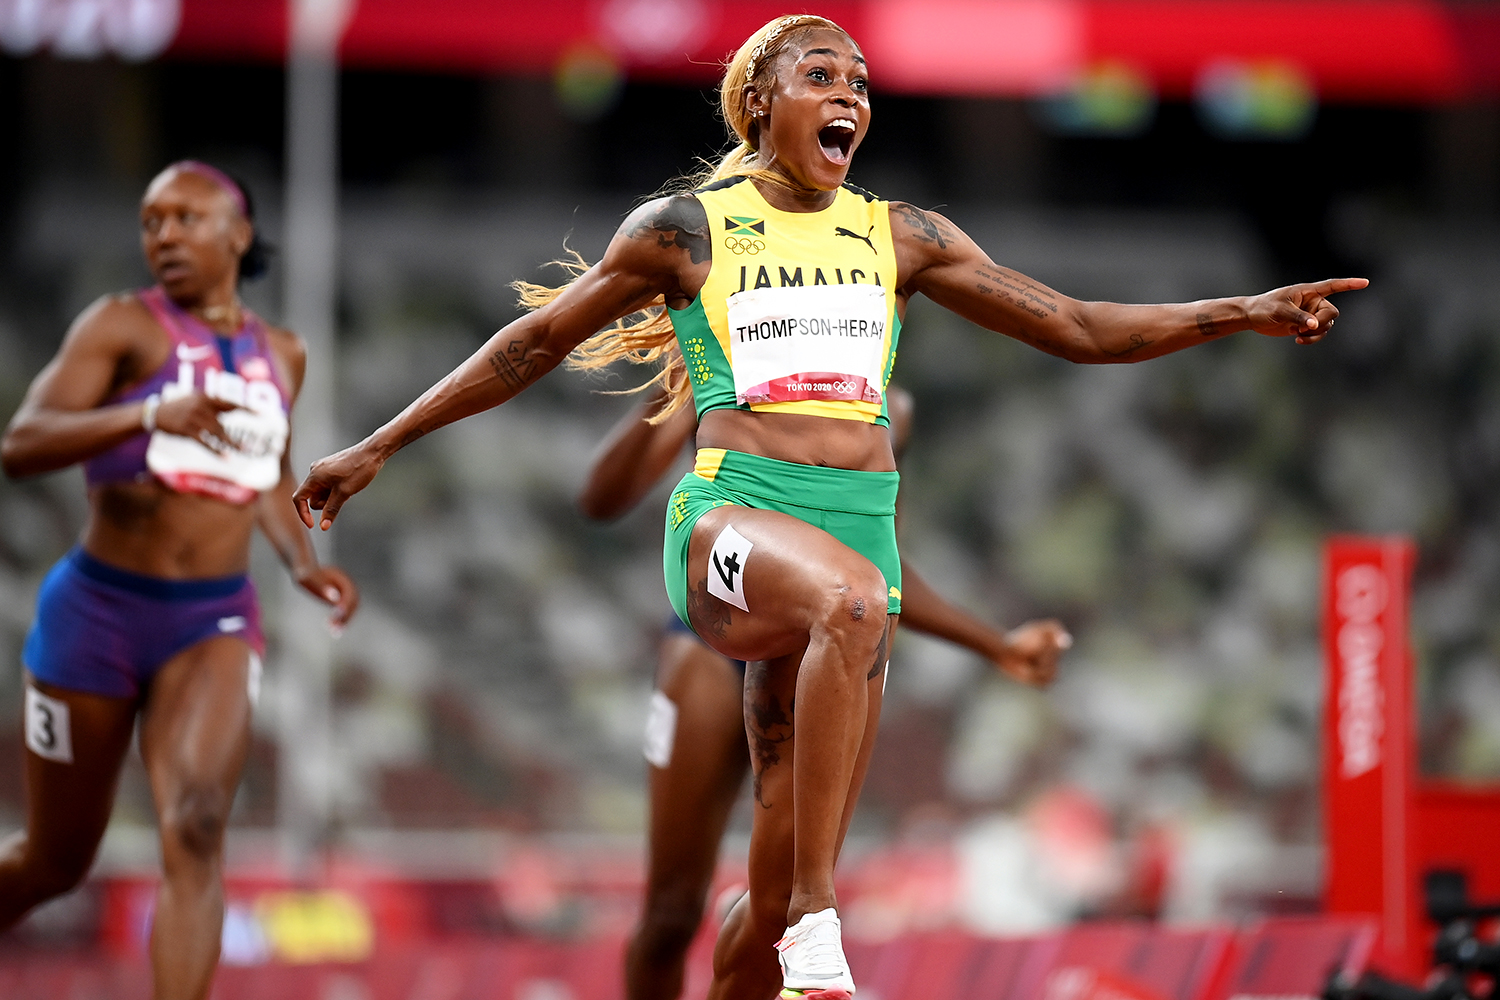 Jamaican Sprinter Elaine Thompson-Herah Breaks Flo-Jo's Decades-Old Olympic Record at Tokyo Games